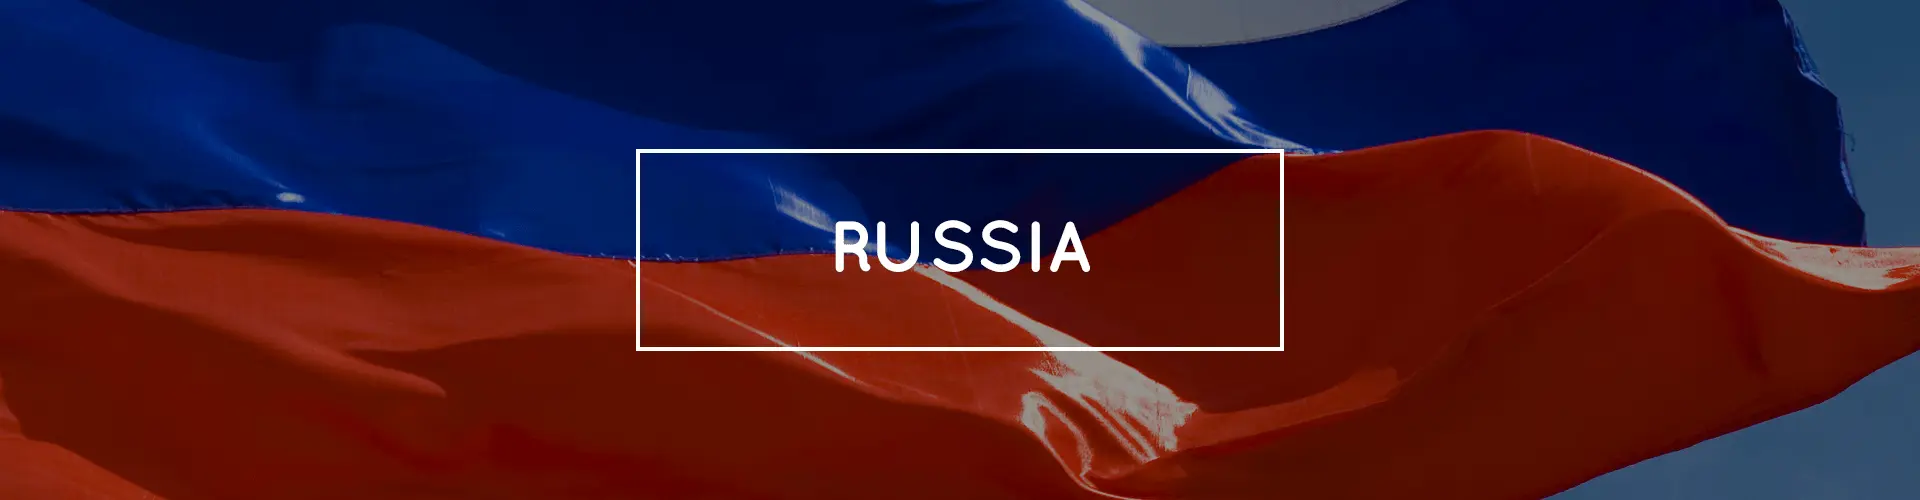 russia banner flag